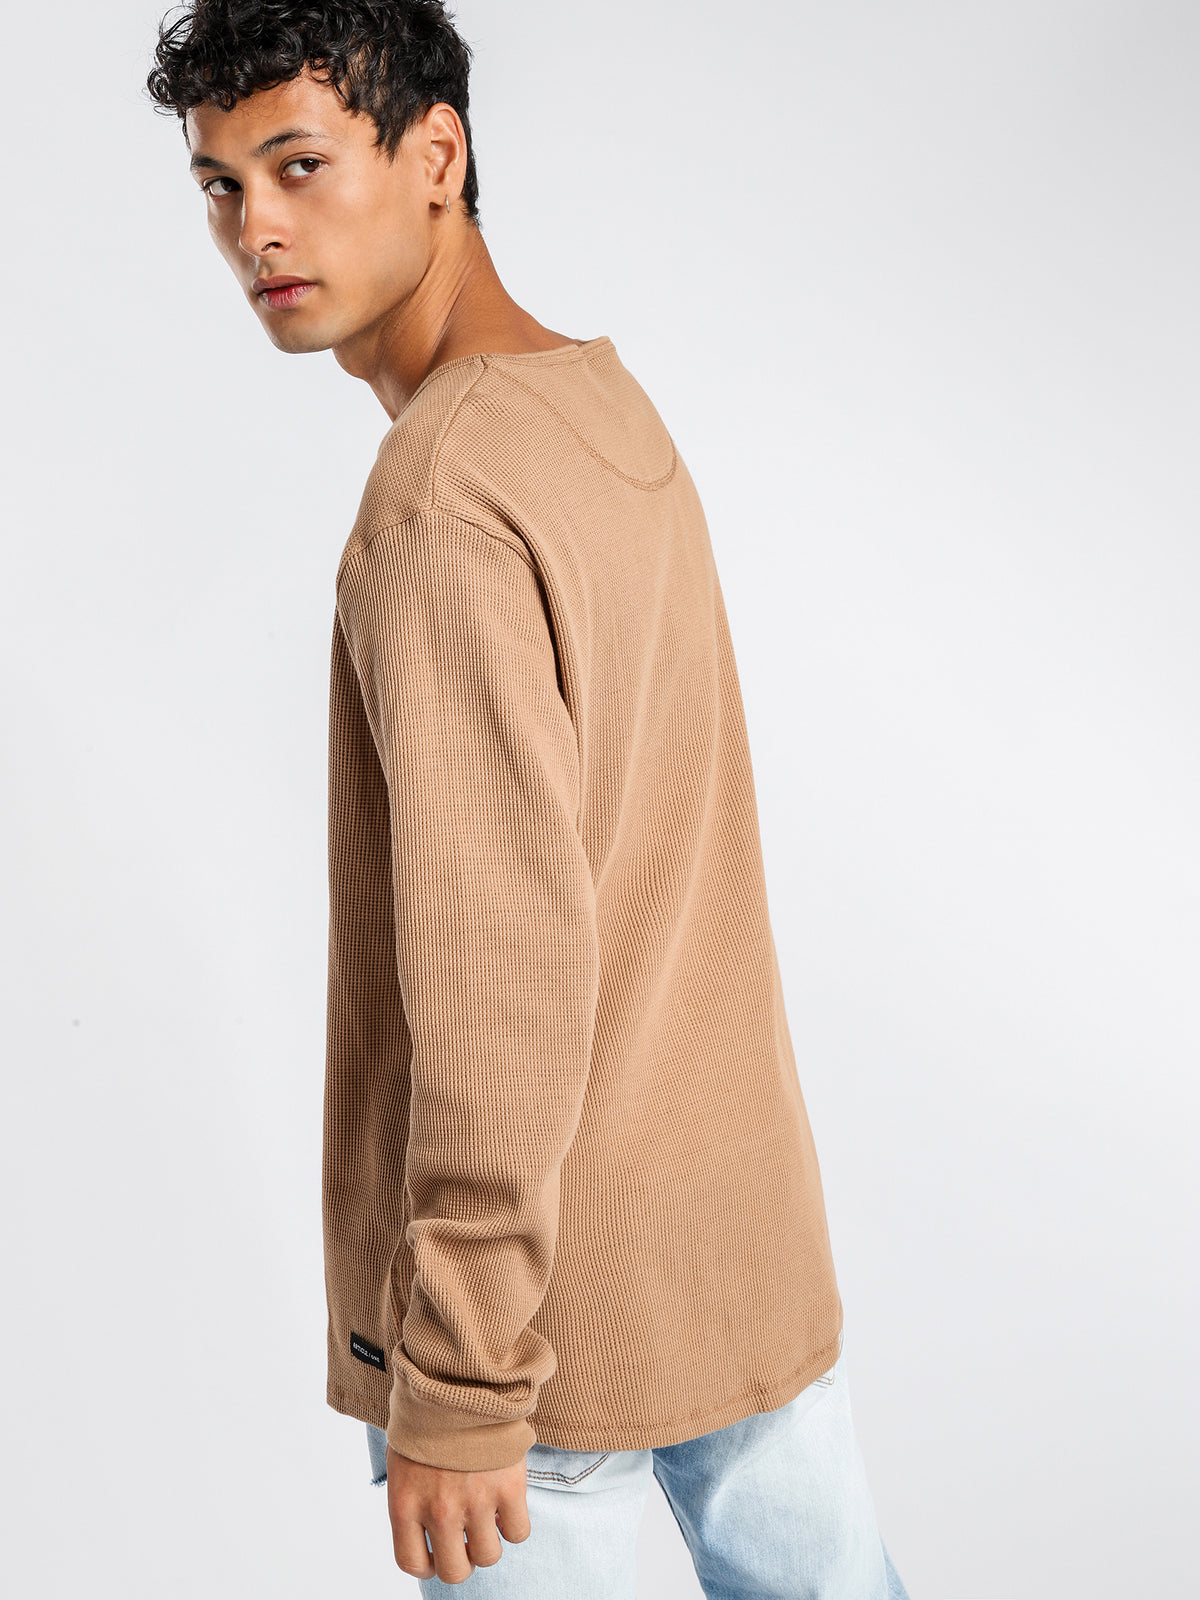 Waffle Long Sleeve Crew Top in Camel